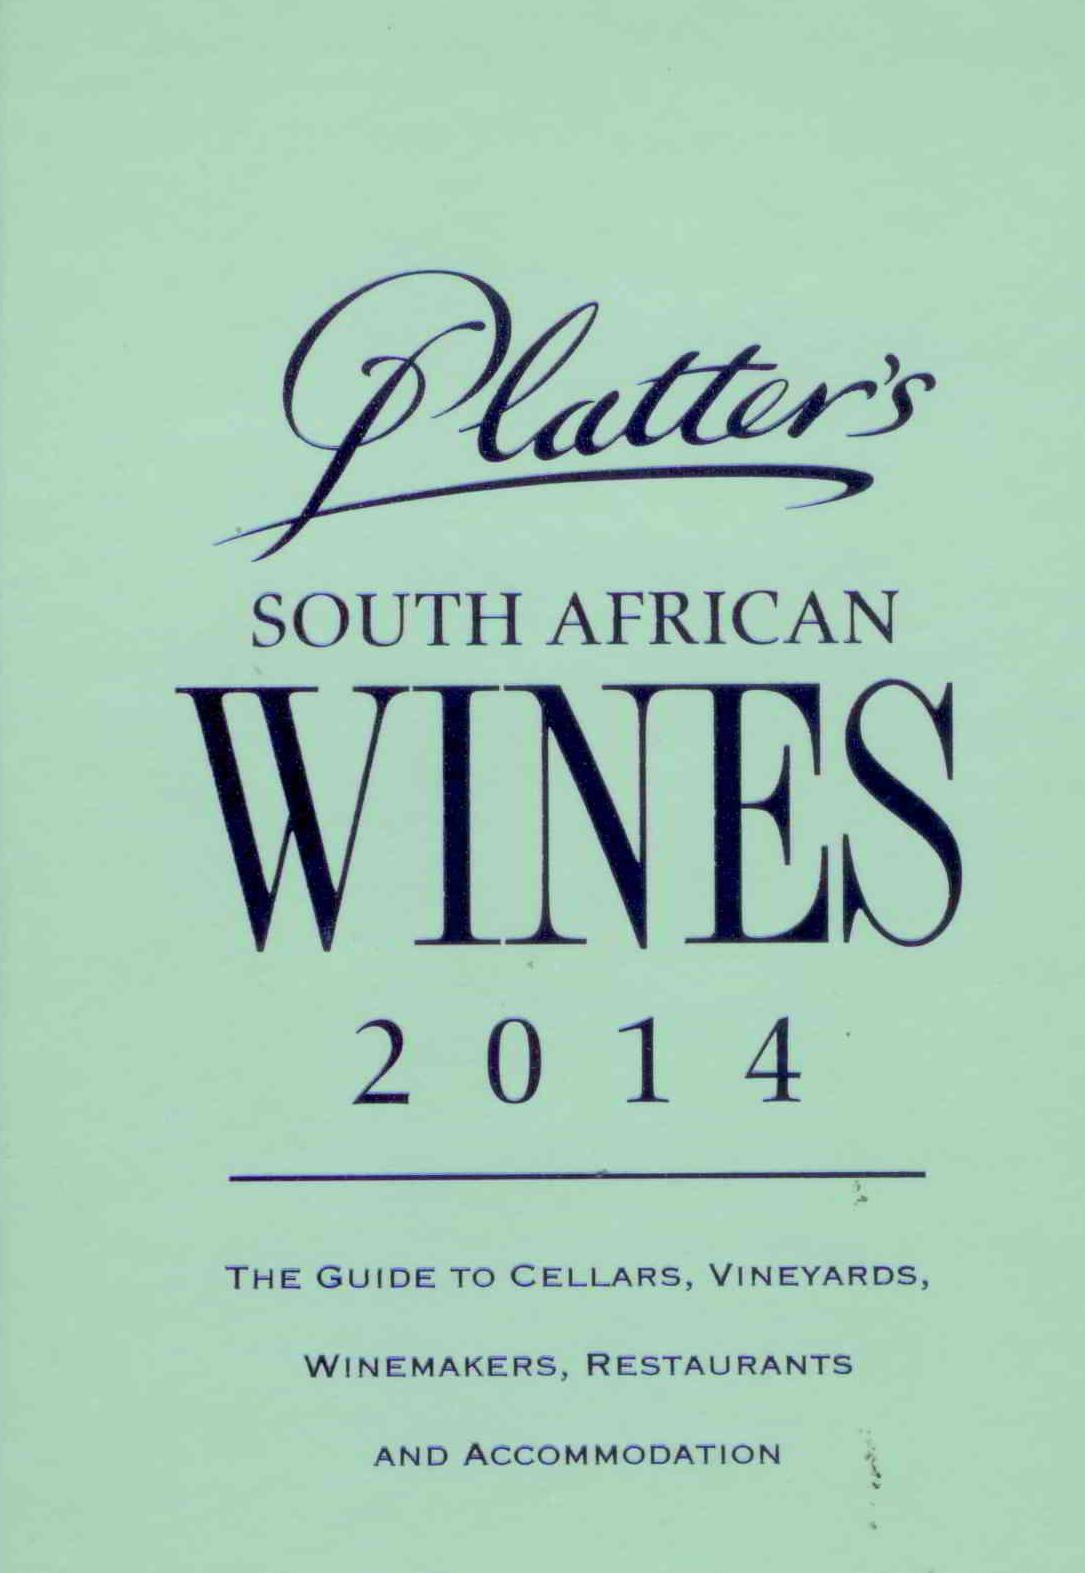 John Platter recommends Percy Tours in Hermanus for Hermanus Wine Tours, near Cape Town, South Africa